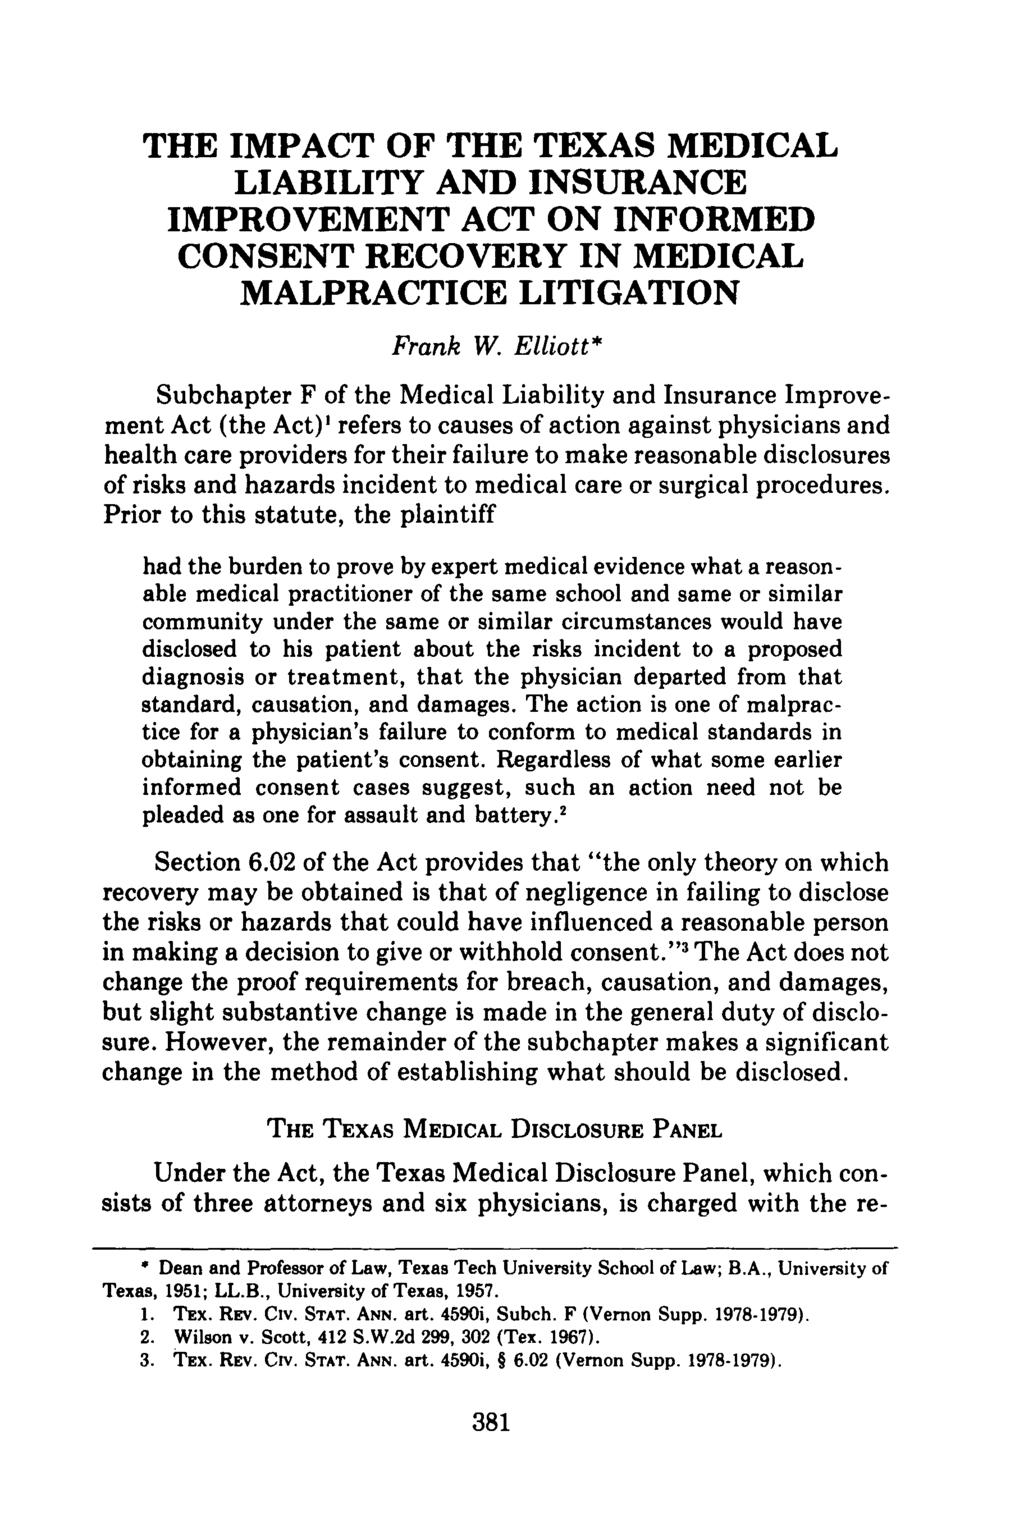 THE IMPACT OF THE TEXAS MEDICAL LIABILITY AND INSURANCE IMPROVEMENT ACT ON INFORMED CONSENT RECOVERY IN MEDICAL MALPRACTICE LITIGATION Frank W.